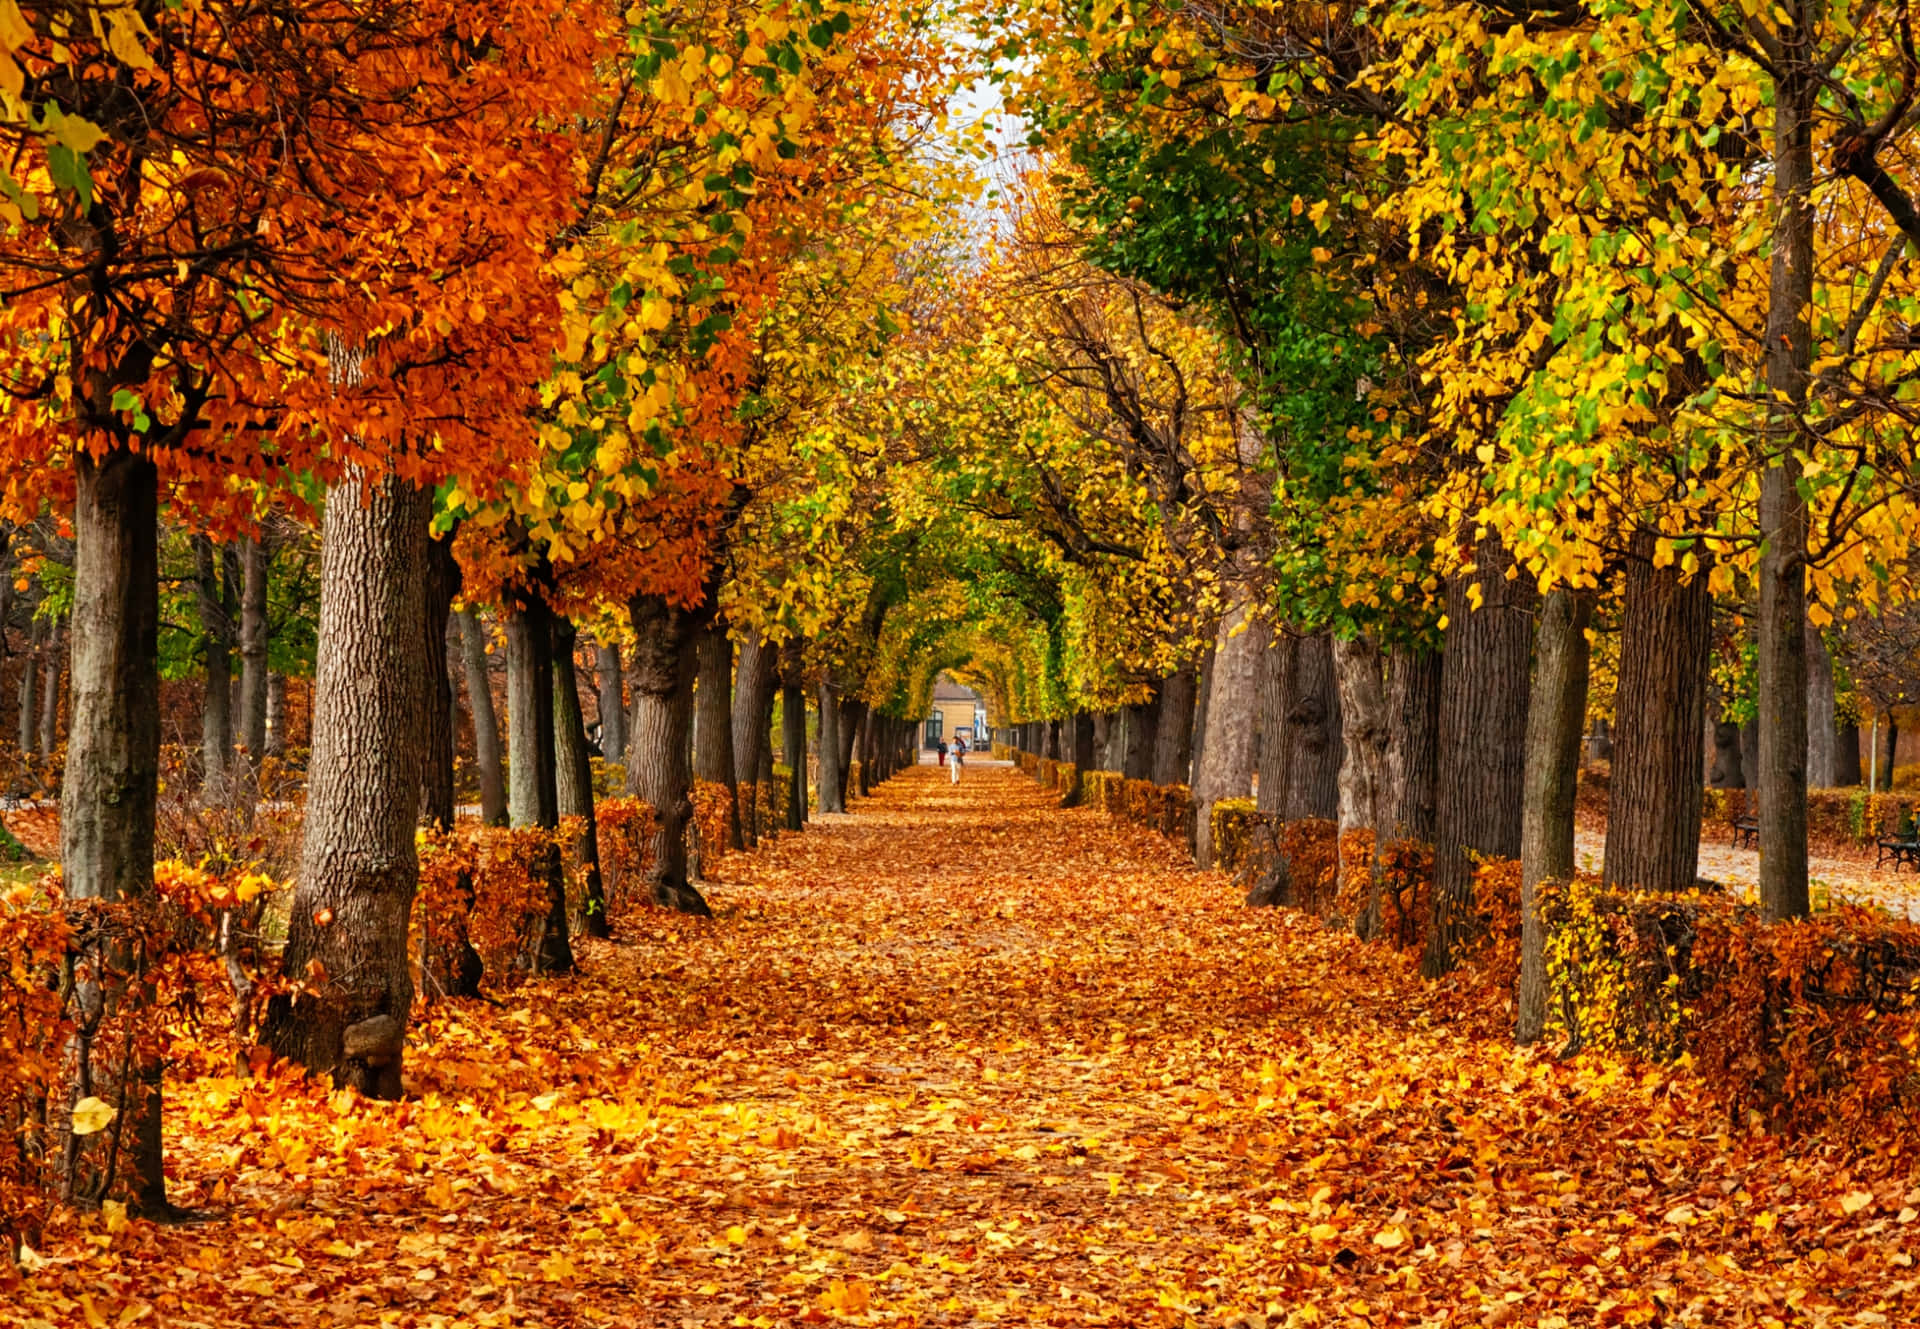 Autumn Leaves On A Pathway Lined With Trees